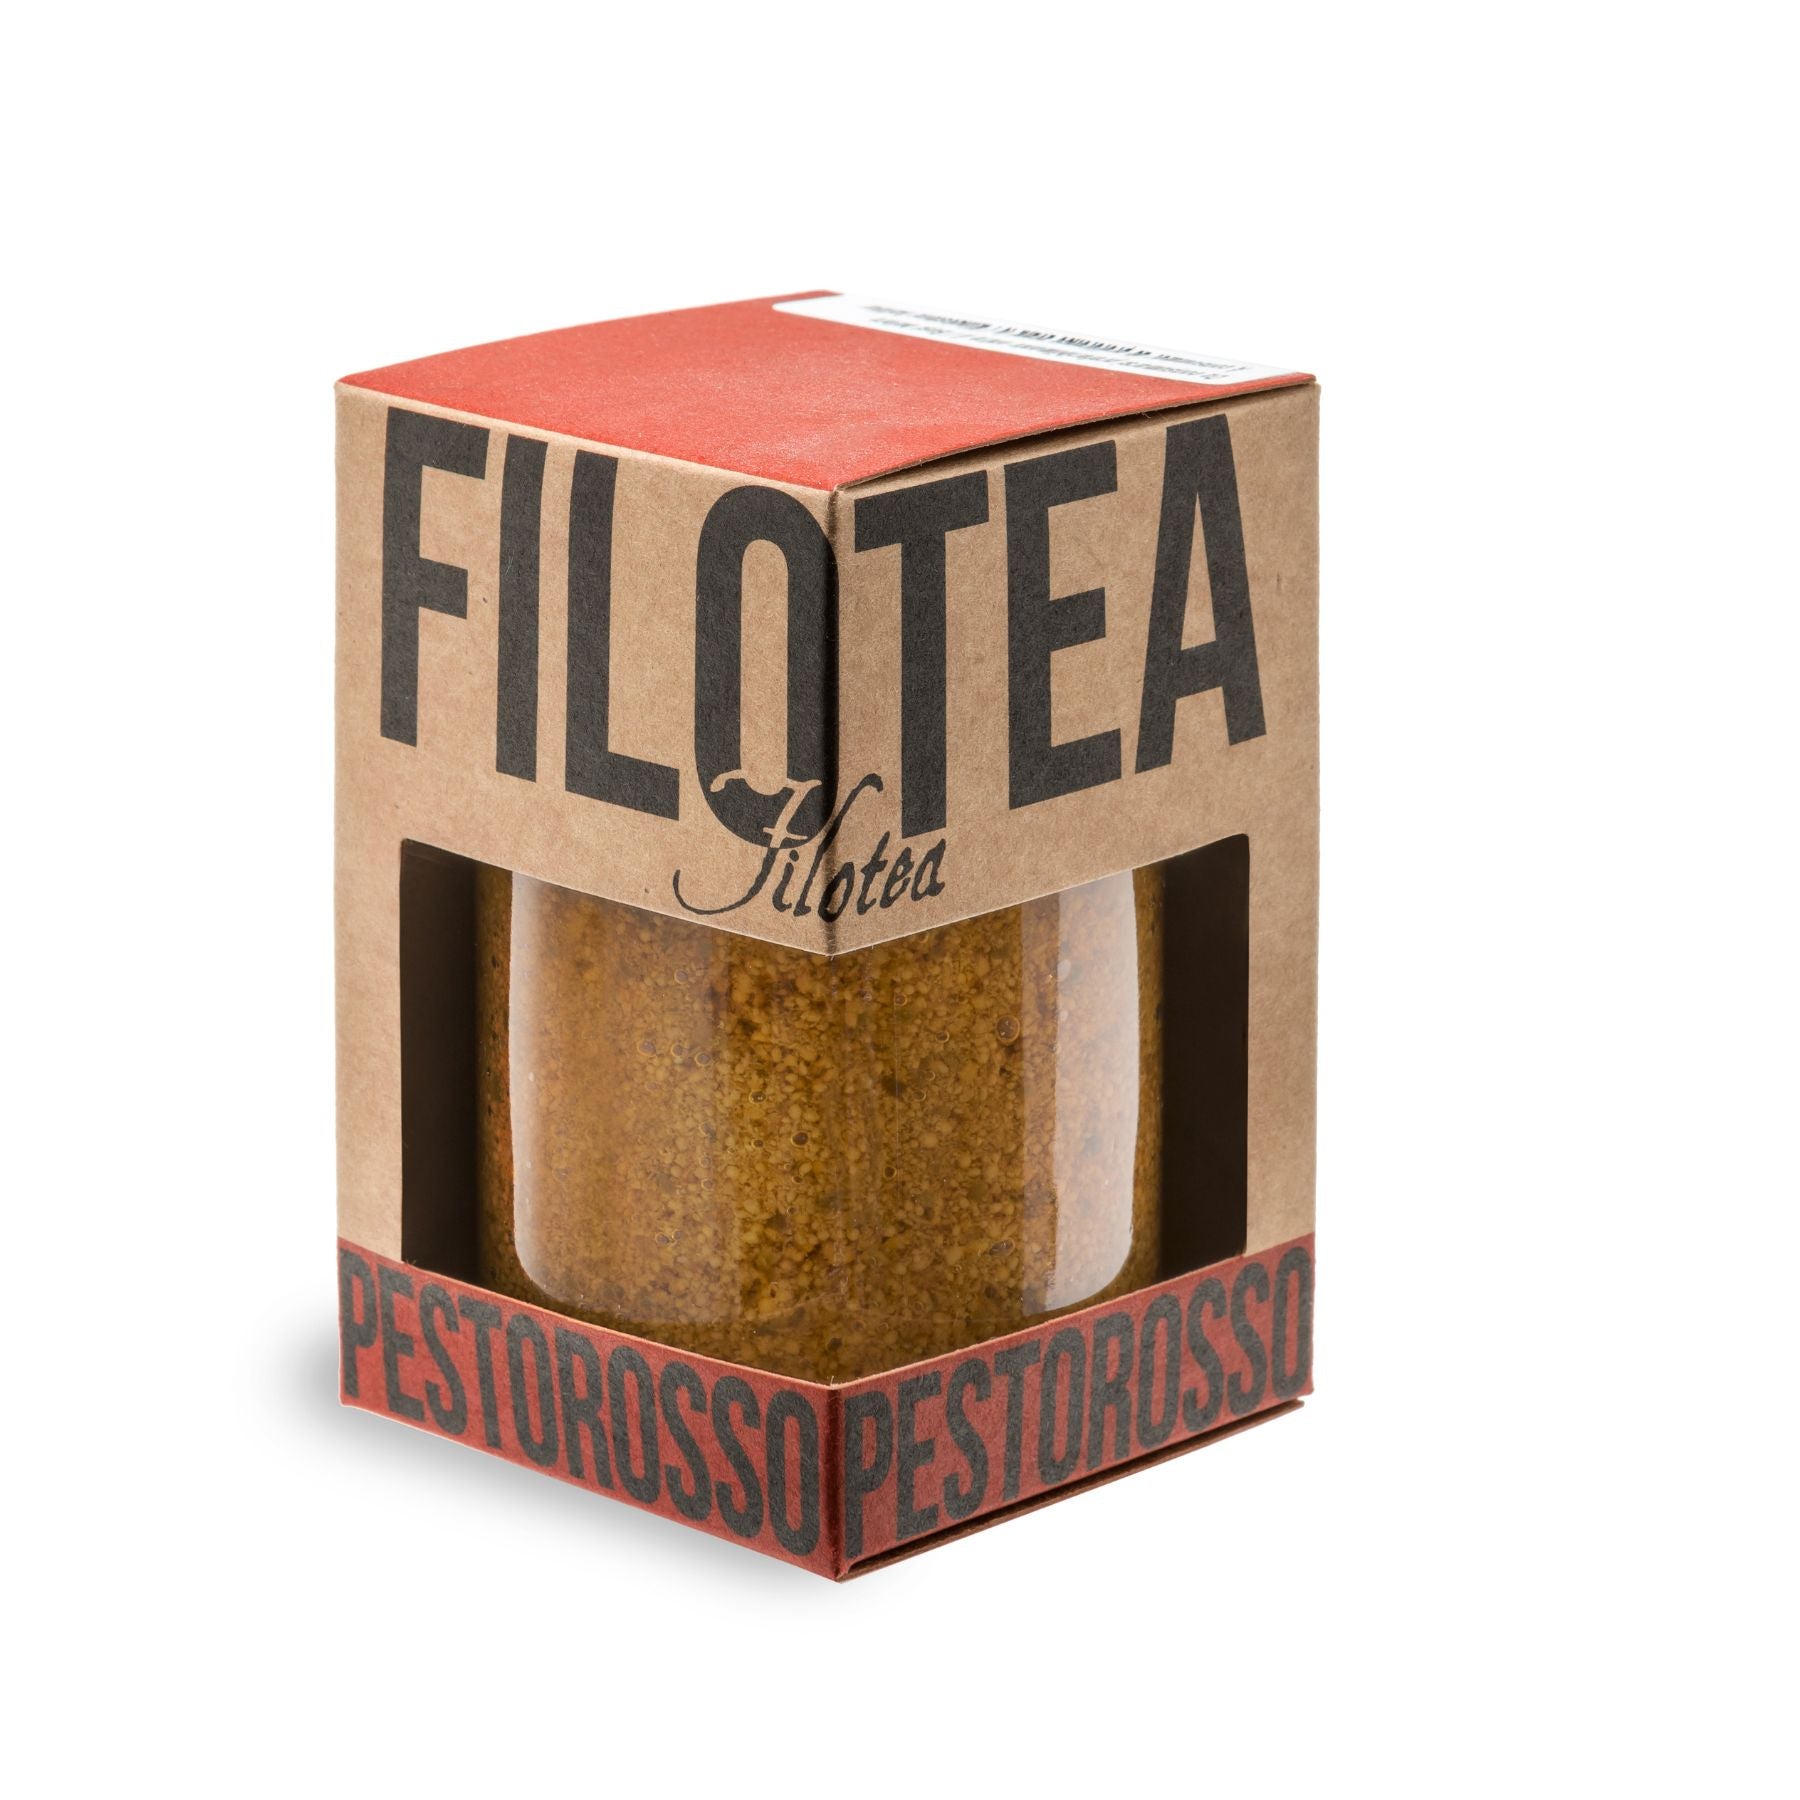 Filotea Red Tomato Pesto 130g | Imported and distributed in the UK by Just Gourmet Foods